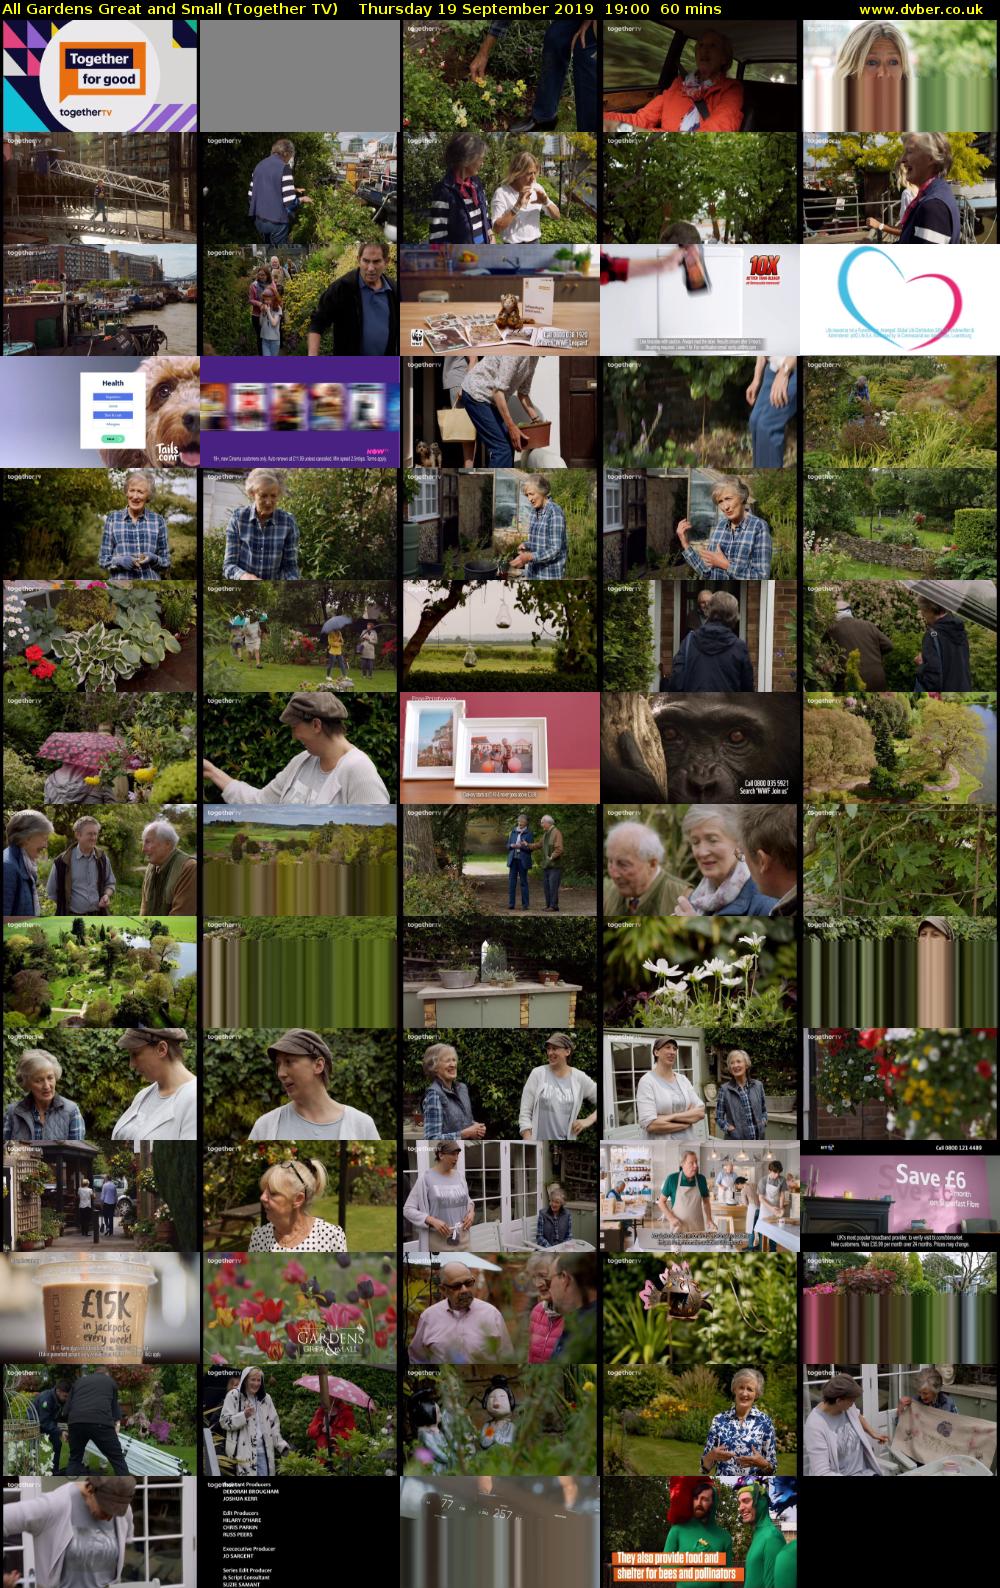 All Gardens Great and Small (Together TV) Thursday 19 September 2019 19:00 - 20:00